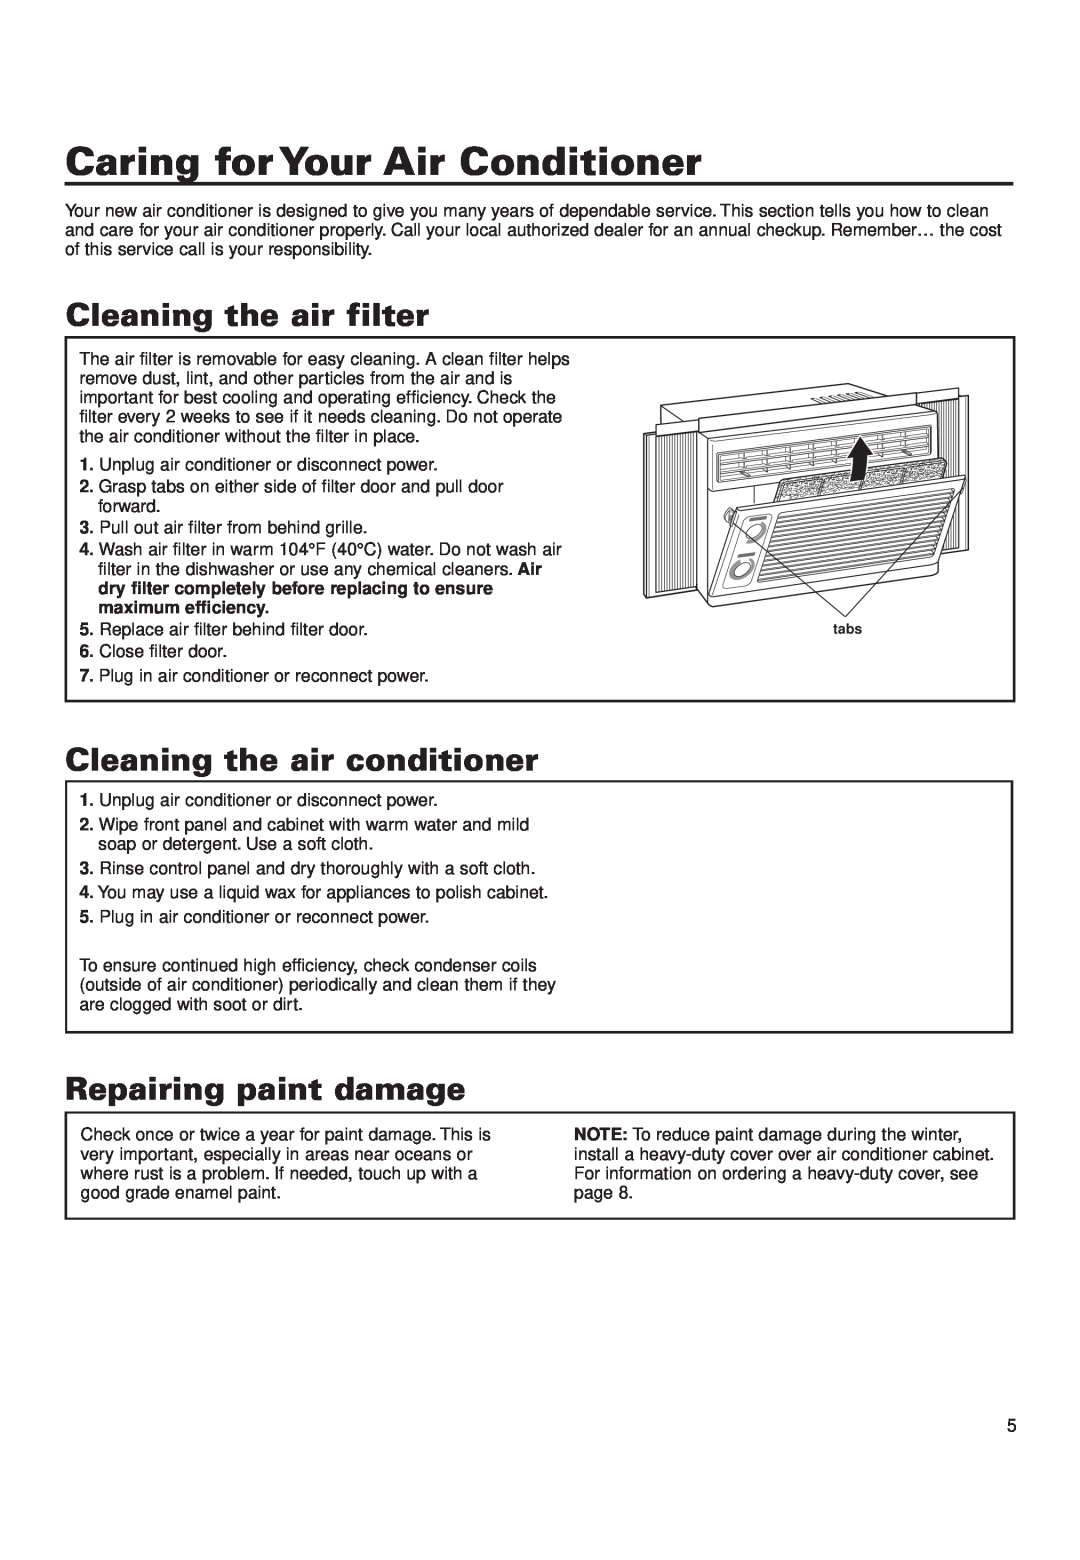 Whirlpool CA5WMK0 Caring for Your Air Conditioner, Cleaning the air filter, Cleaning the air conditioner 